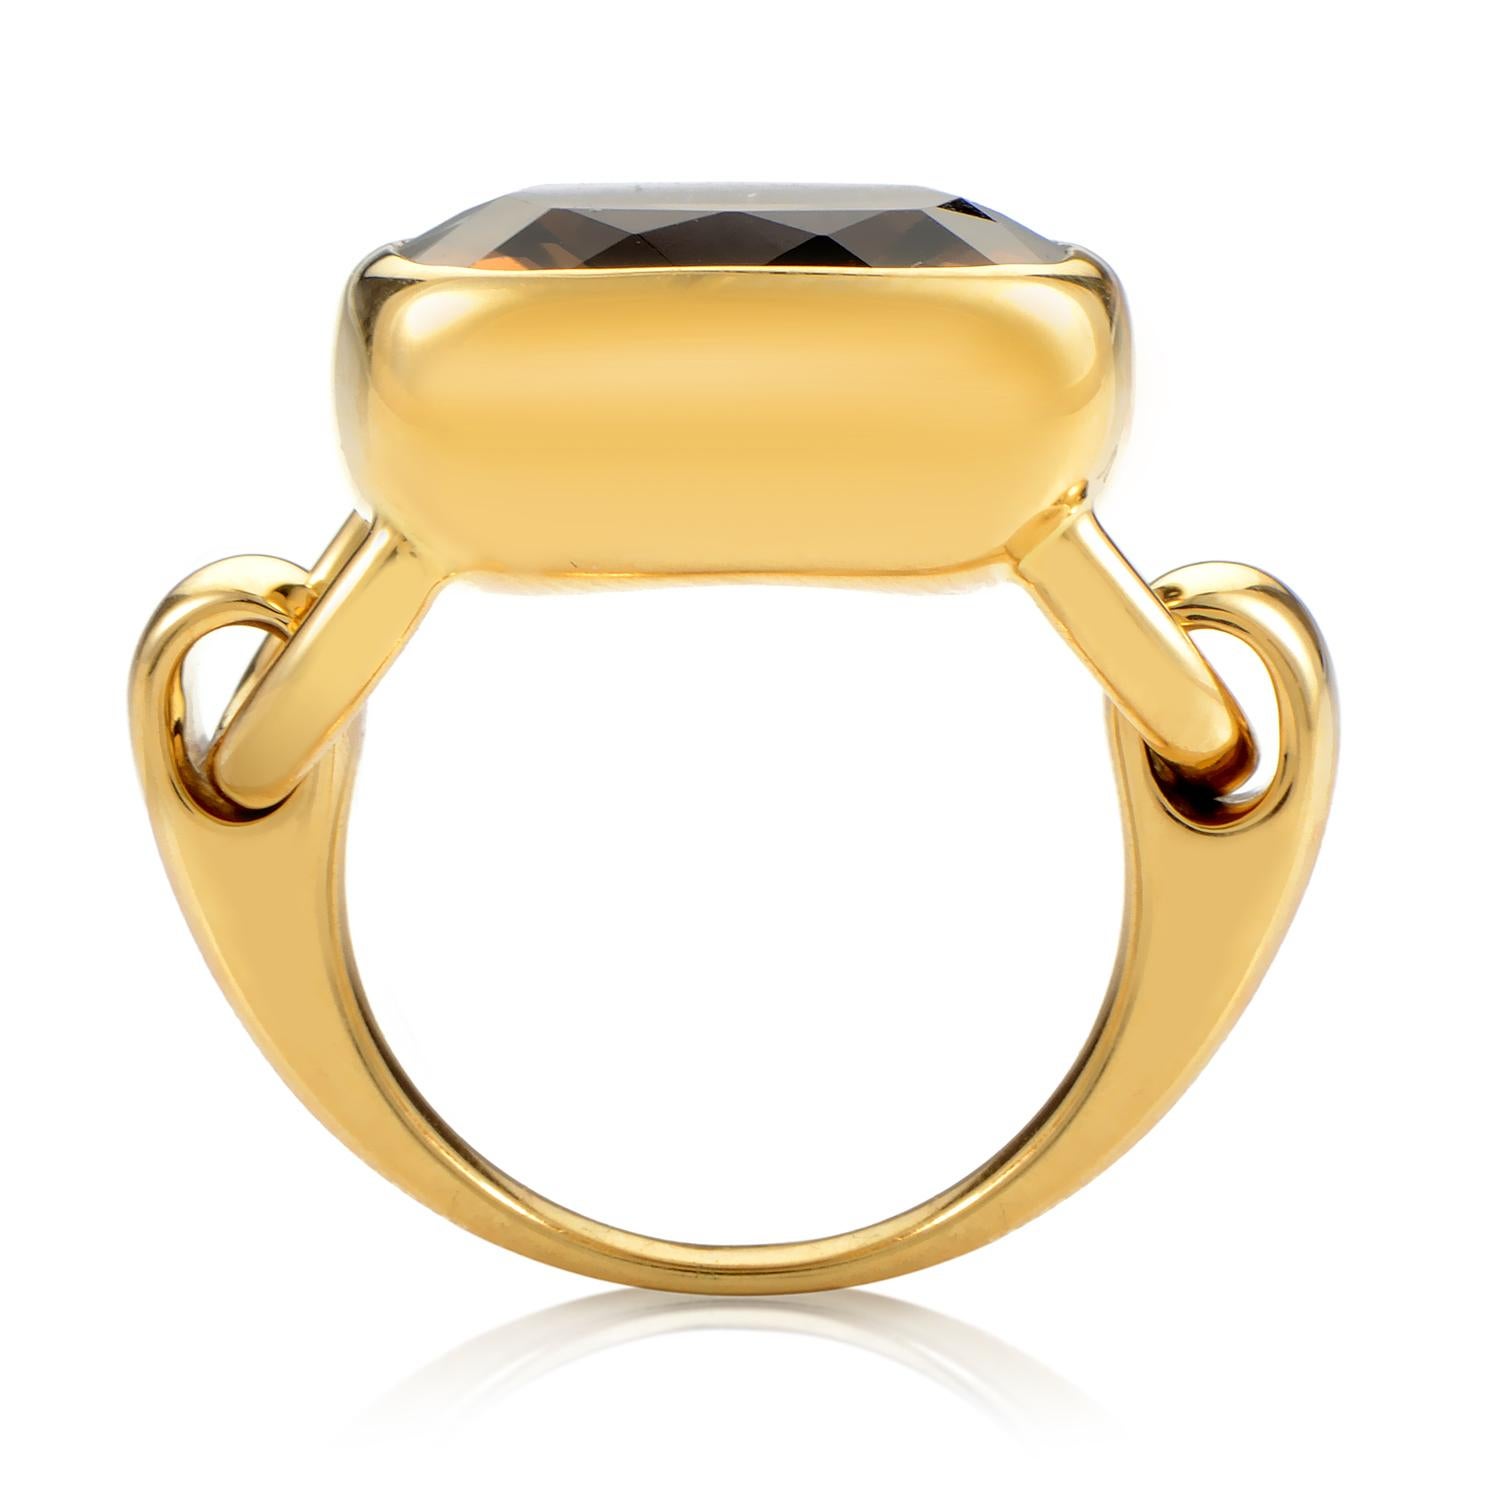 Power and glamour combine in this Poiray ring that embodies opulence. The ring is made of 18K yellow gold that is specially designed with hinges for a smooth, movable cushion shaped bezel setting. A faceted smoky quartz totaling ~8.65ct captures